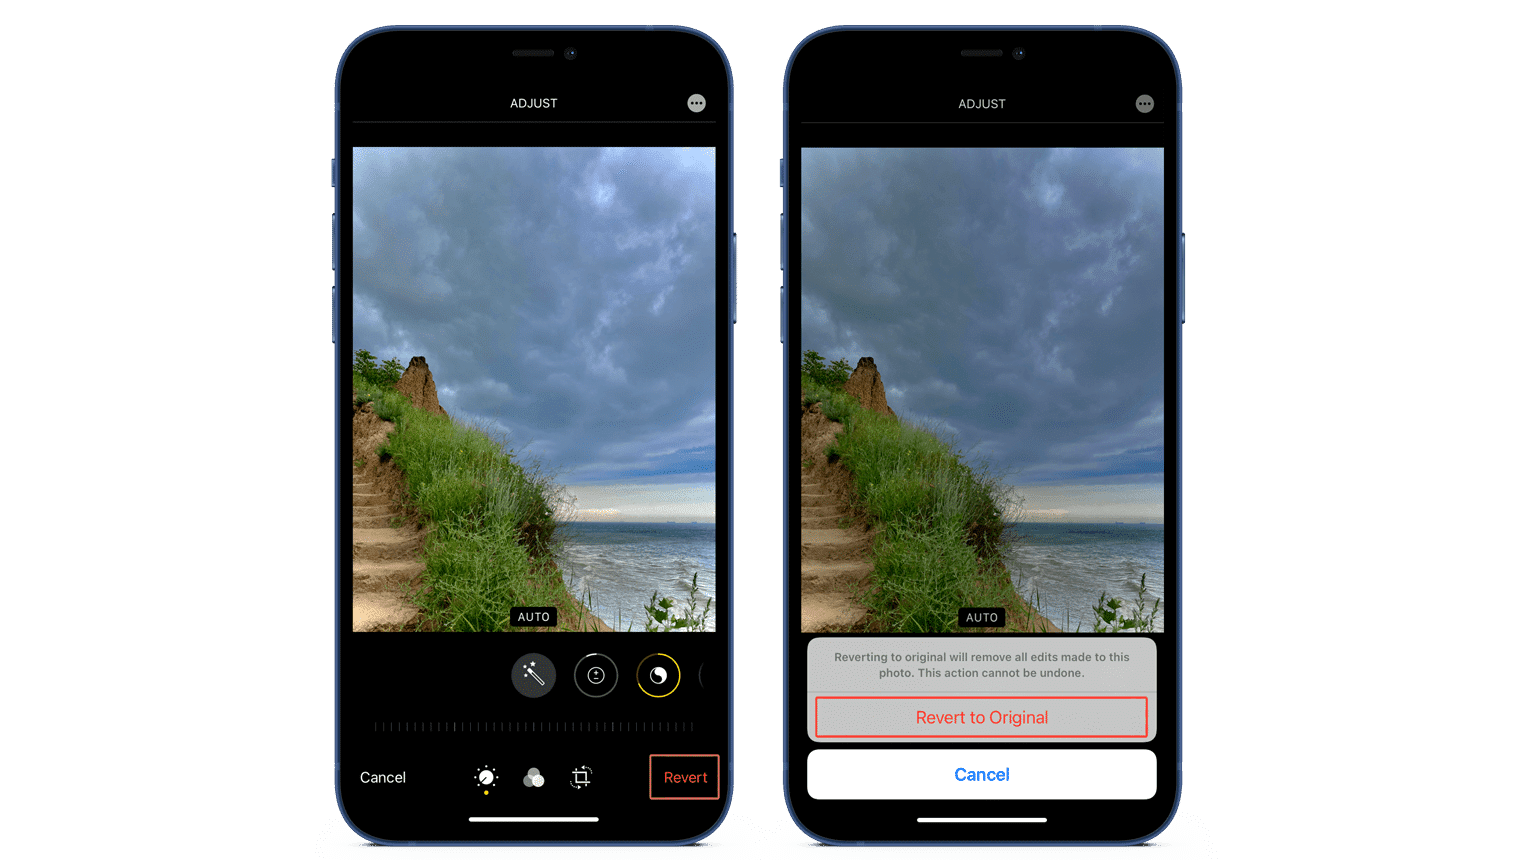 iPhone screens showing how to revert changes in a  photo